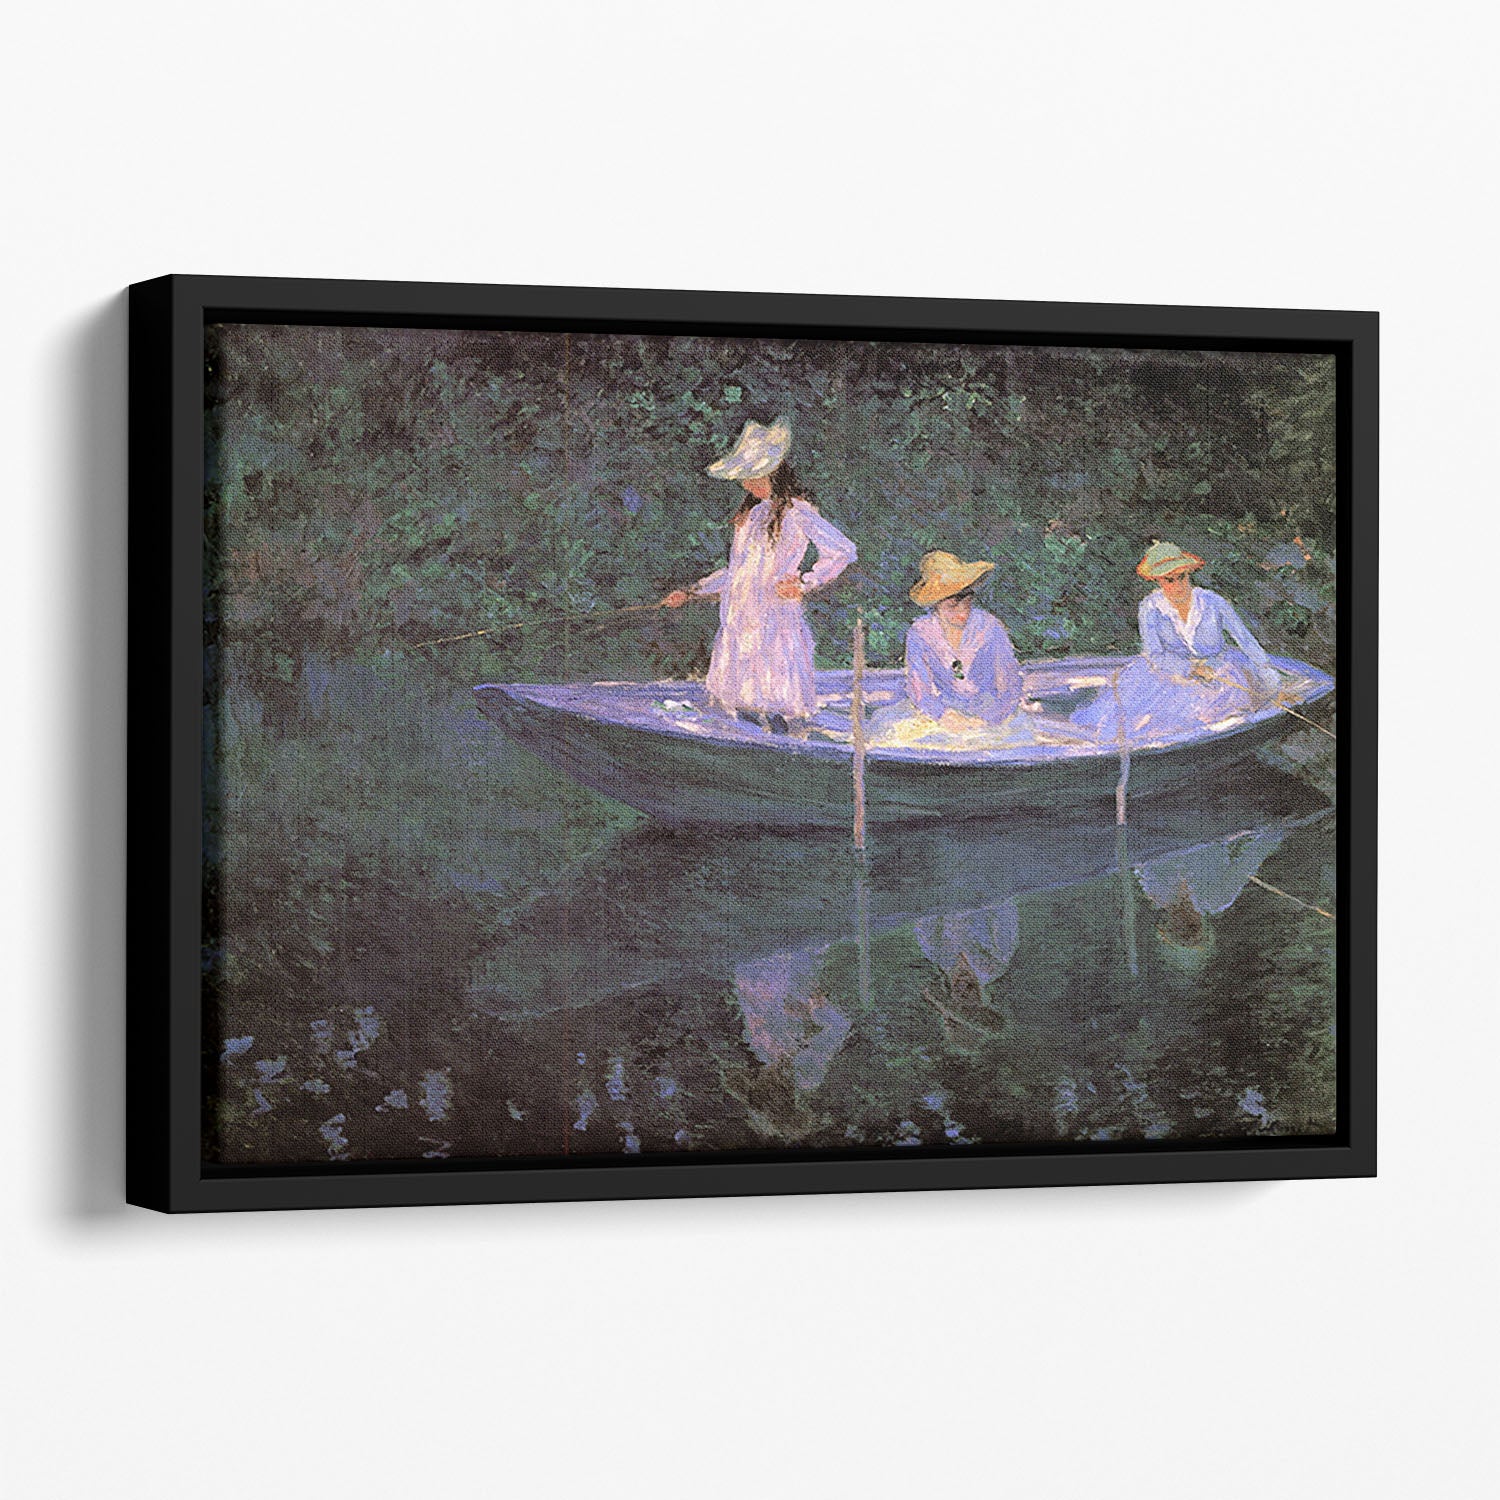 La Barque at Giverny by Monet Floating Framed Canvas